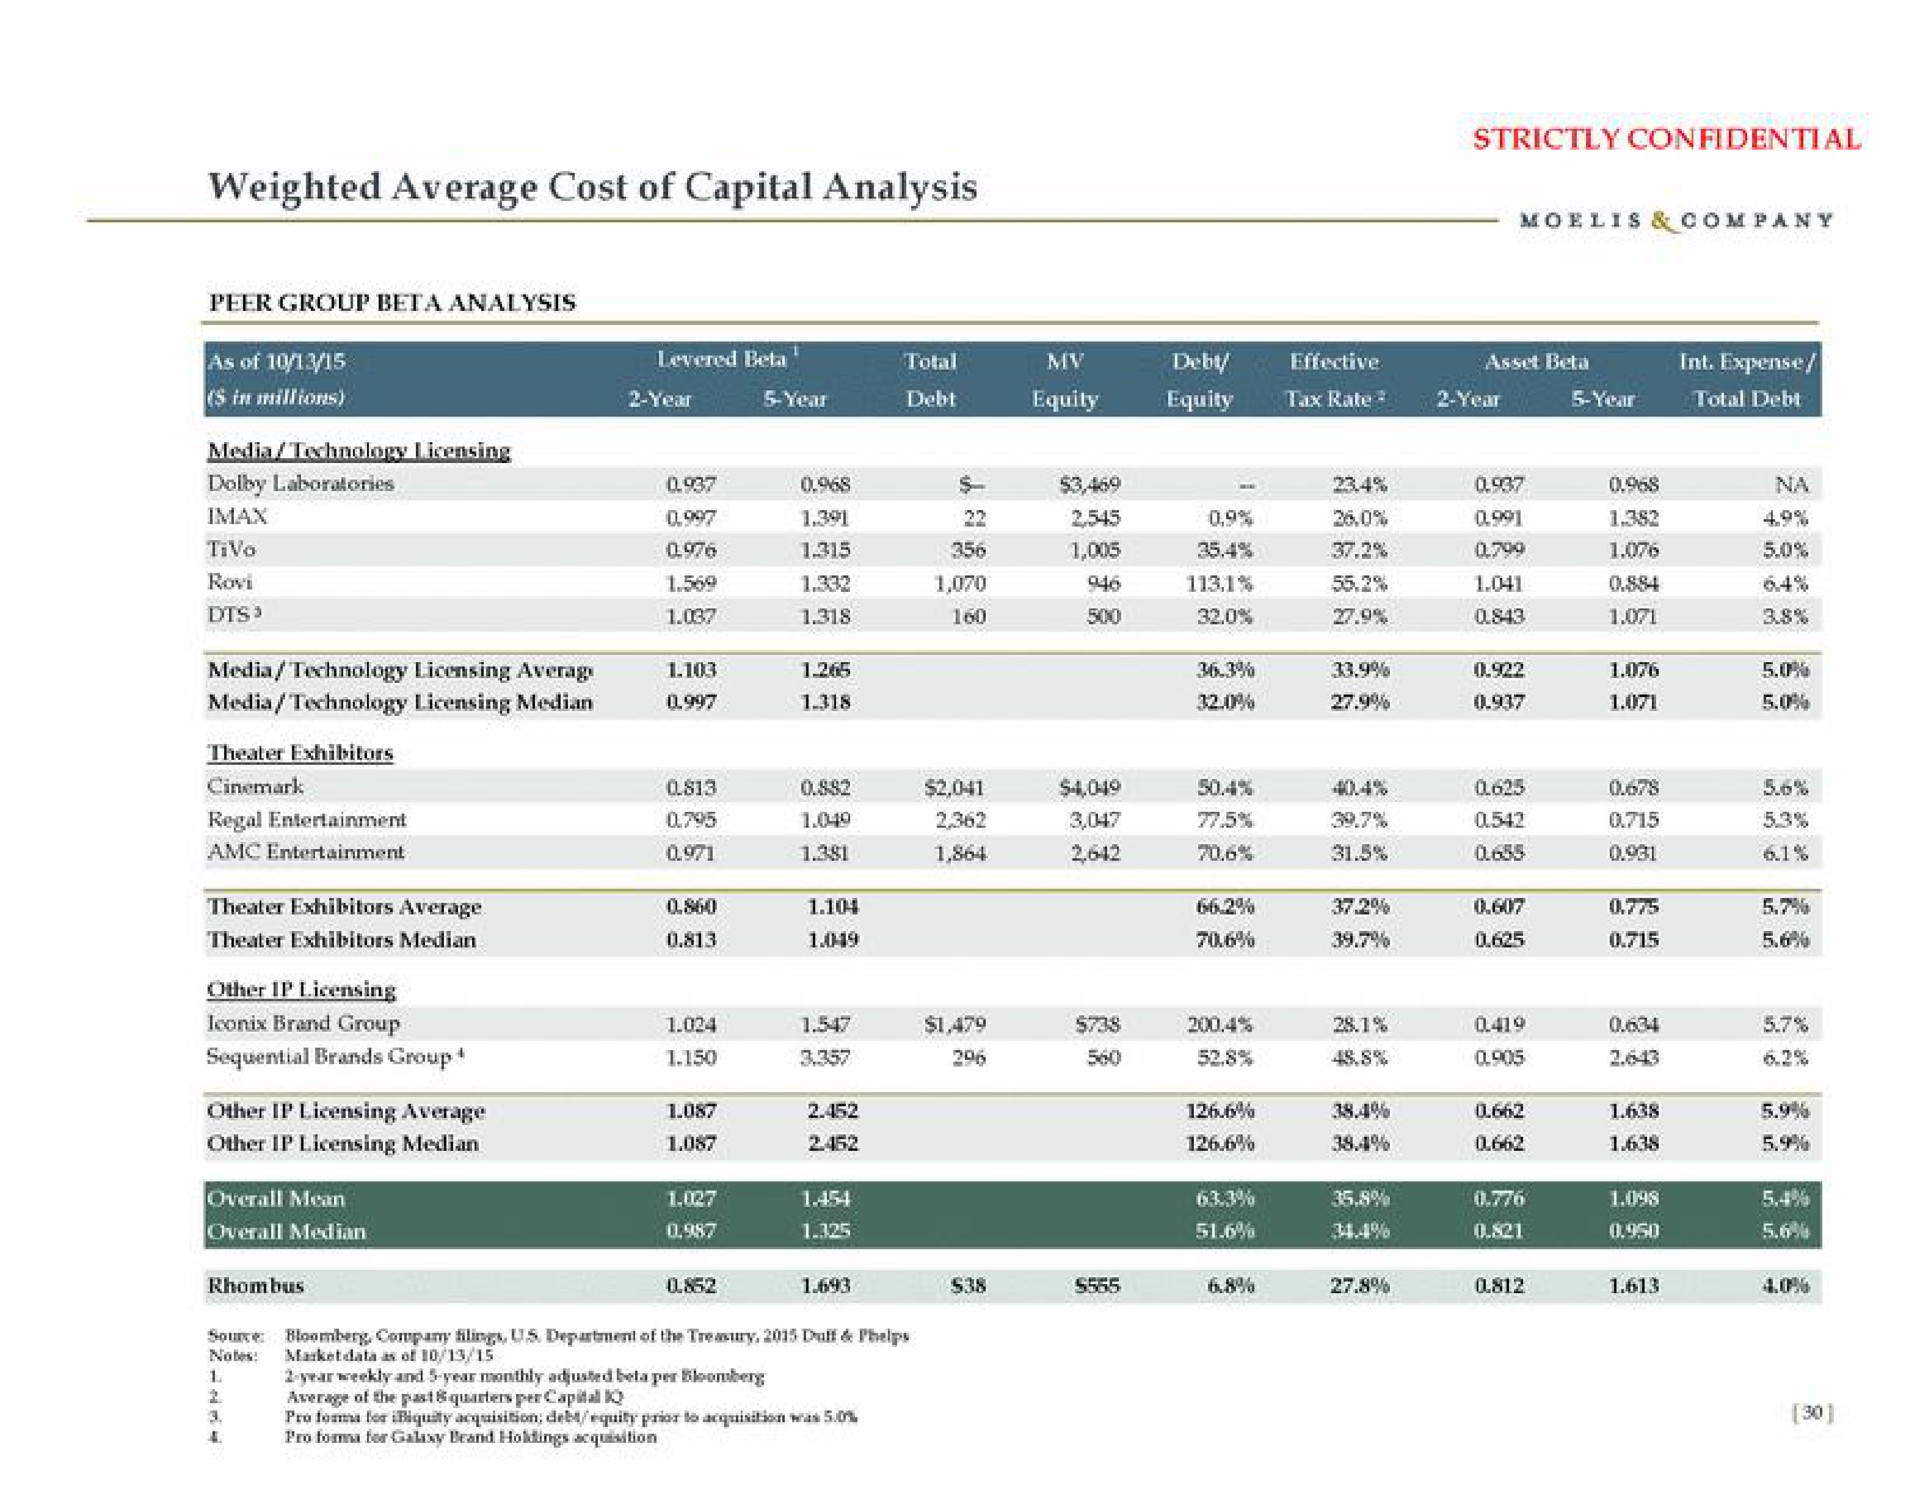 weighted average cost of capital analysis strictly confidential other licensing average | Moelis & Company